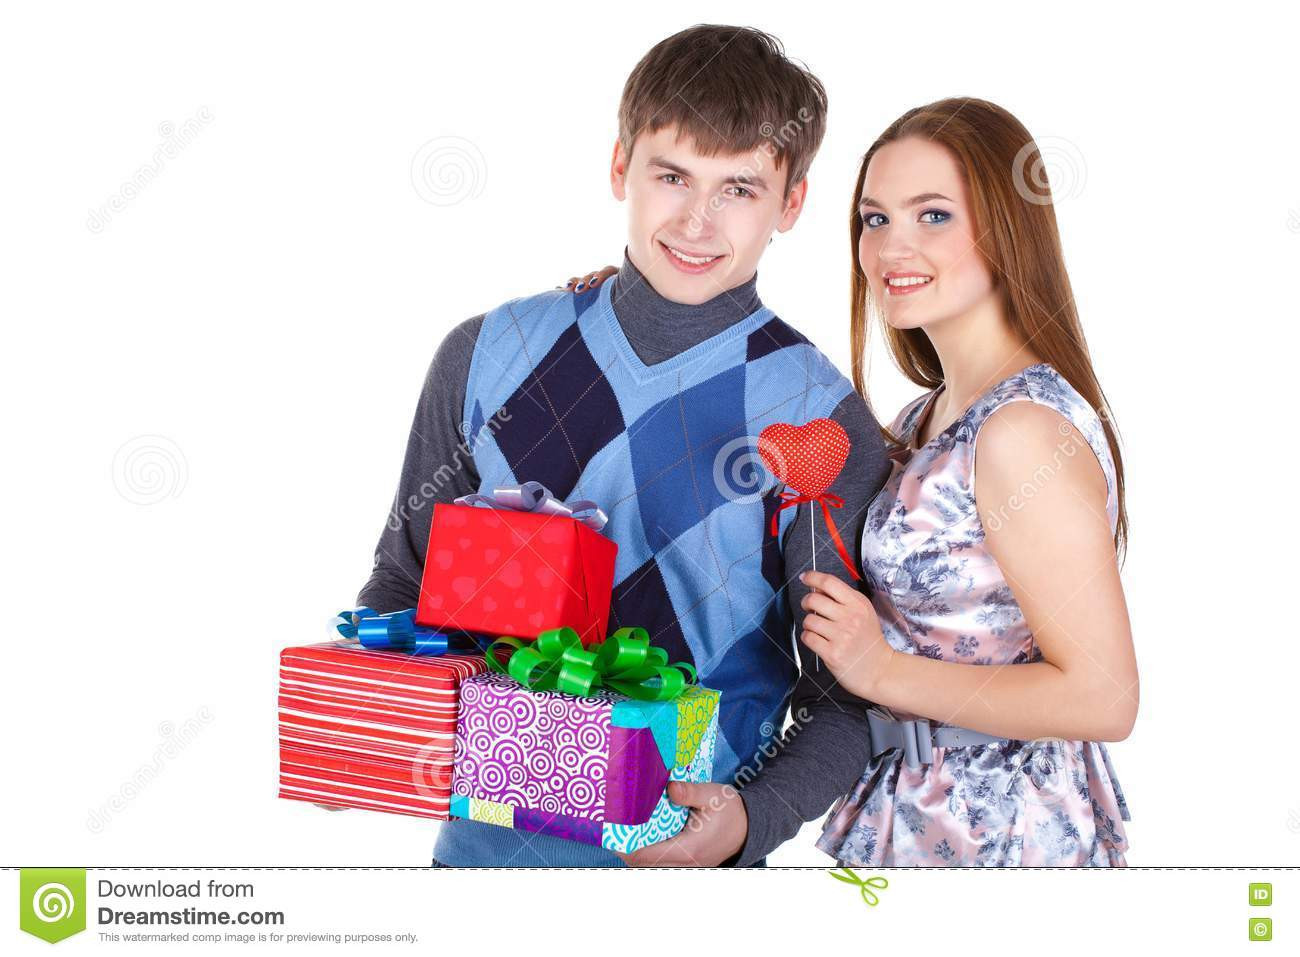 Gift Ideas For Young Couples
 20 the Best Ideas for Gift Ideas for Young Couples